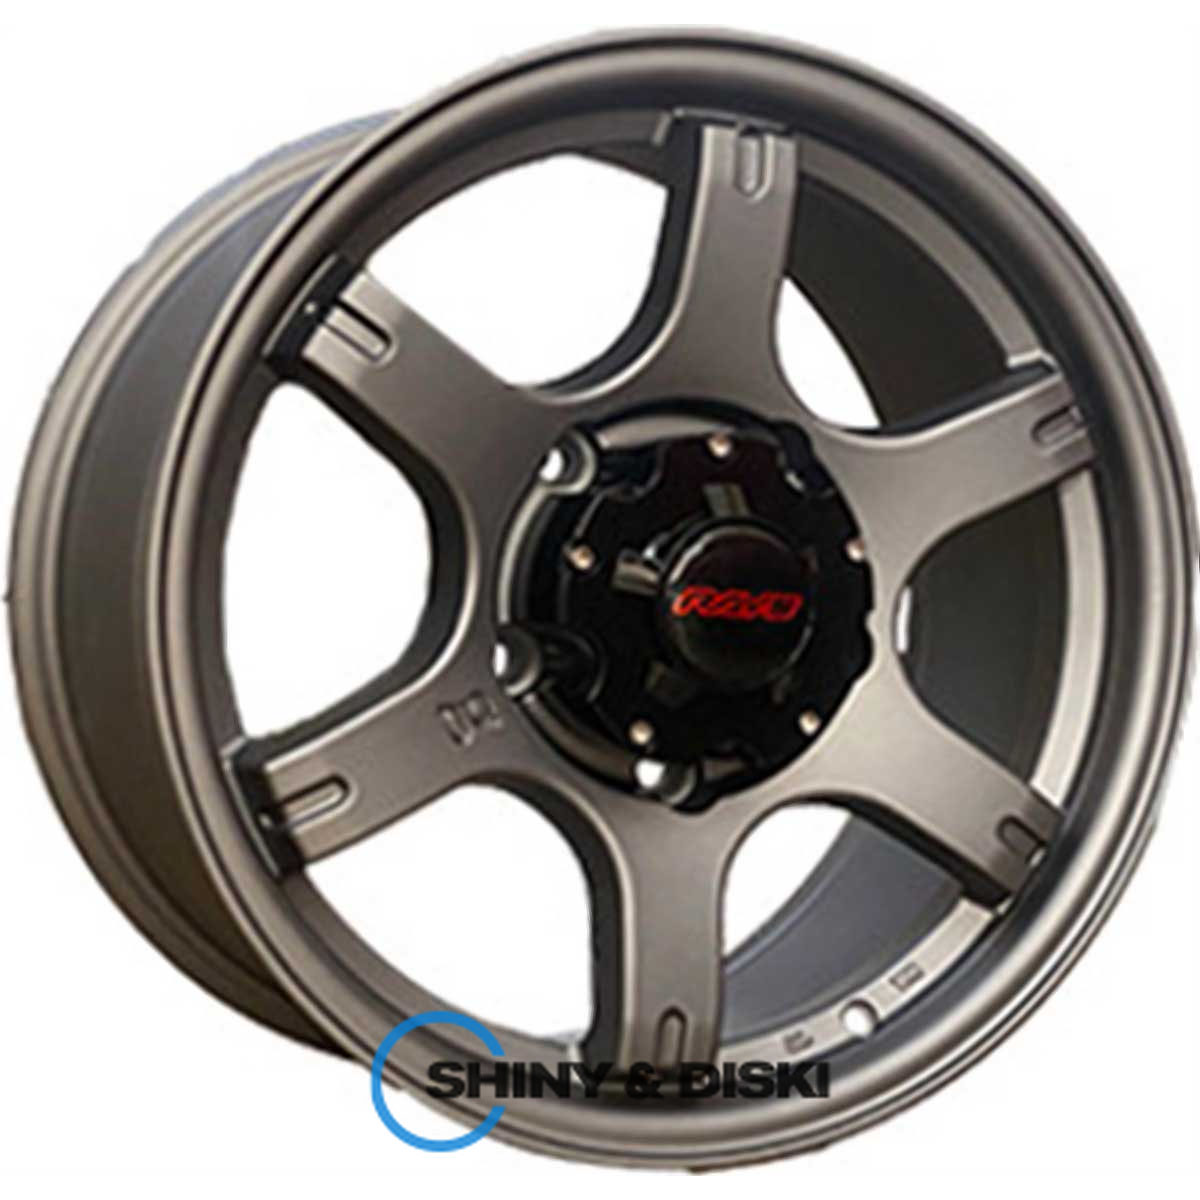 off road wheels ow6059 gm